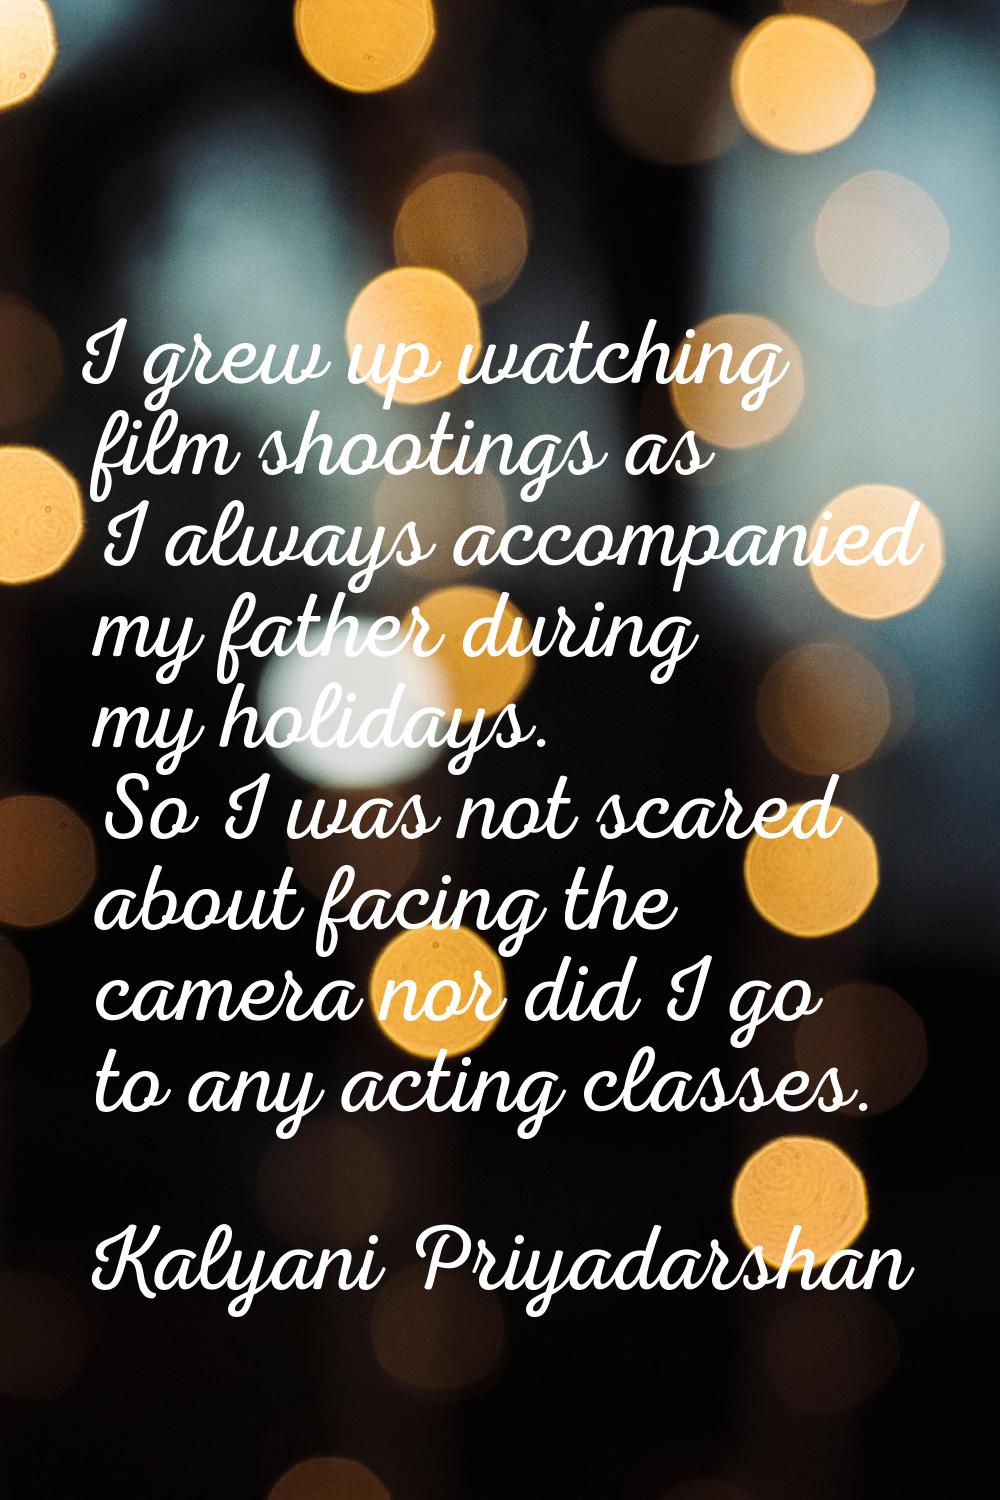 I grew up watching film shootings as I always accompanied my father during my holidays. So I was no